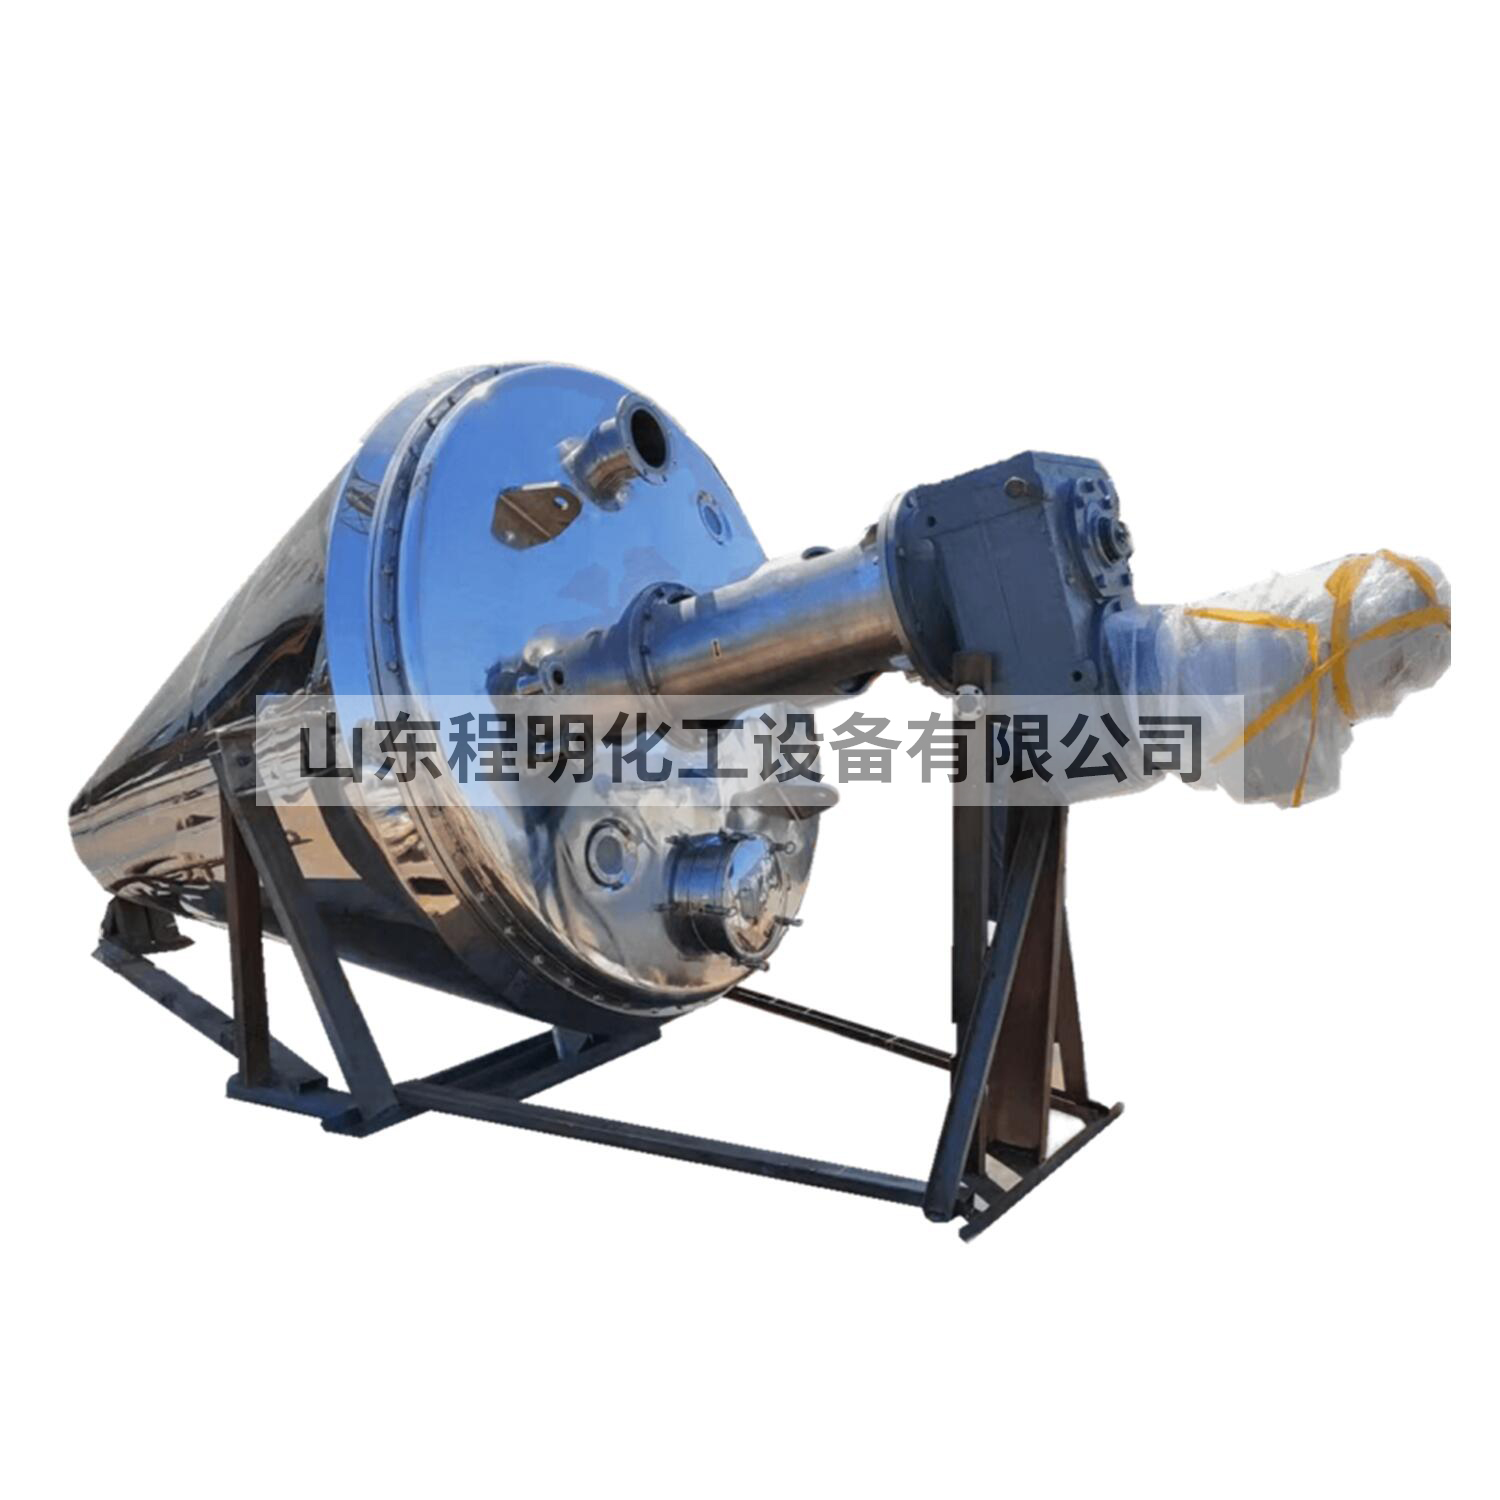 Conical Bottom Helical Ribbon Mixer Vacuum Dryer(图1)